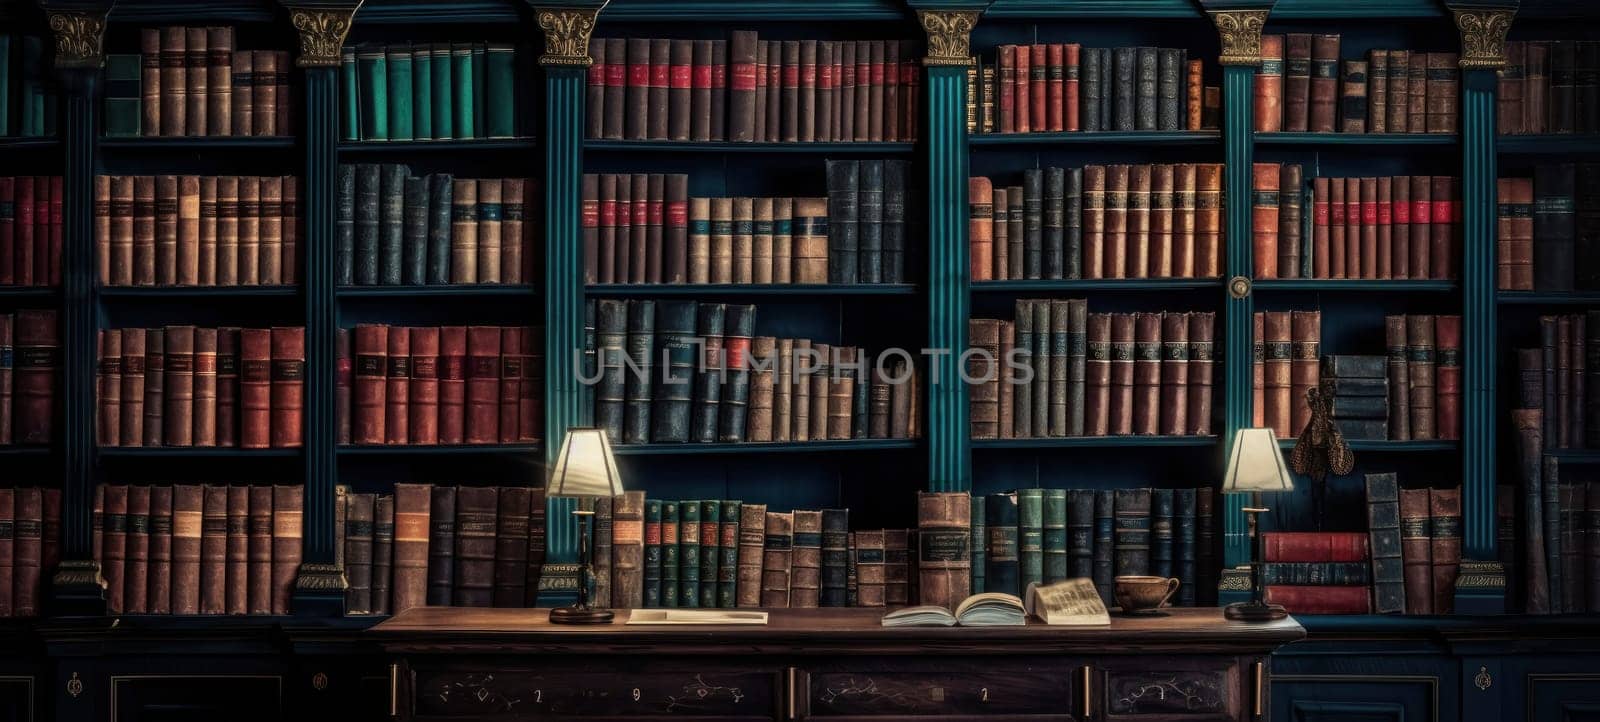 Extensive Book Collection on Wooden Shelves by andreyz